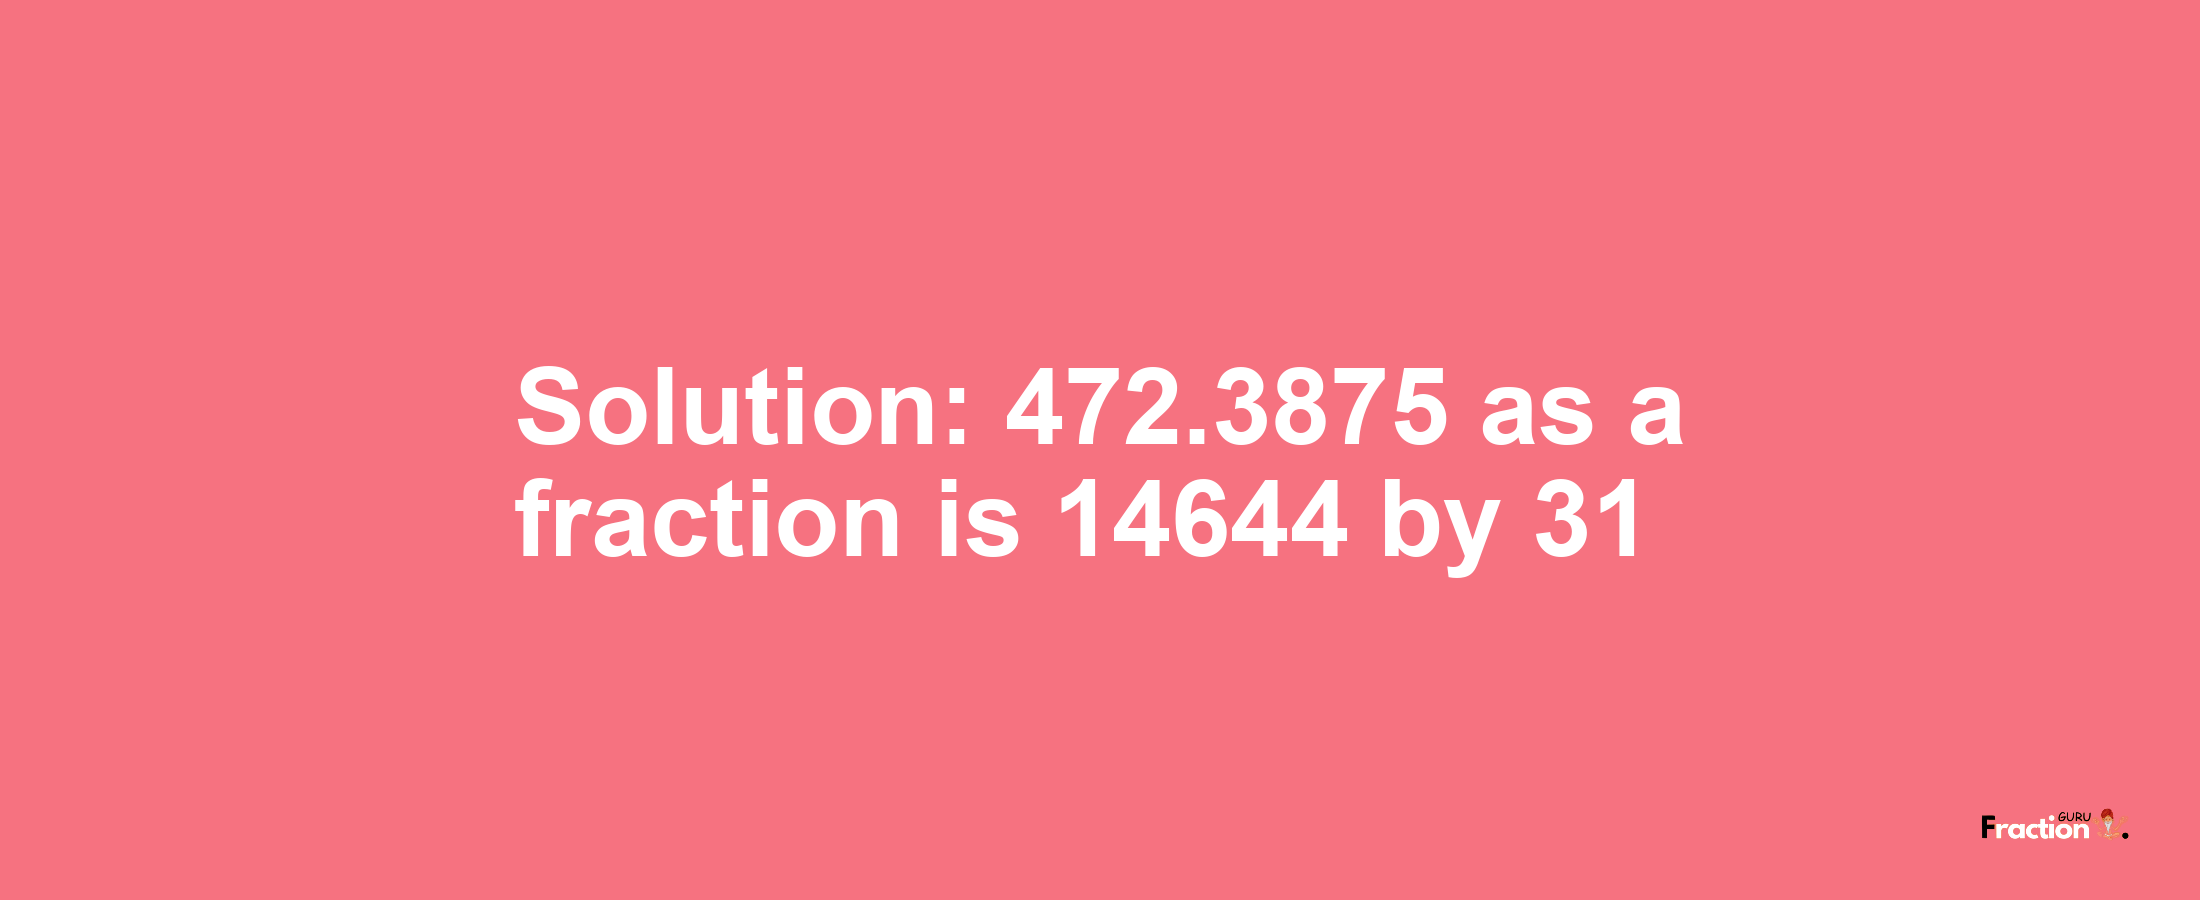 Solution:472.3875 as a fraction is 14644/31